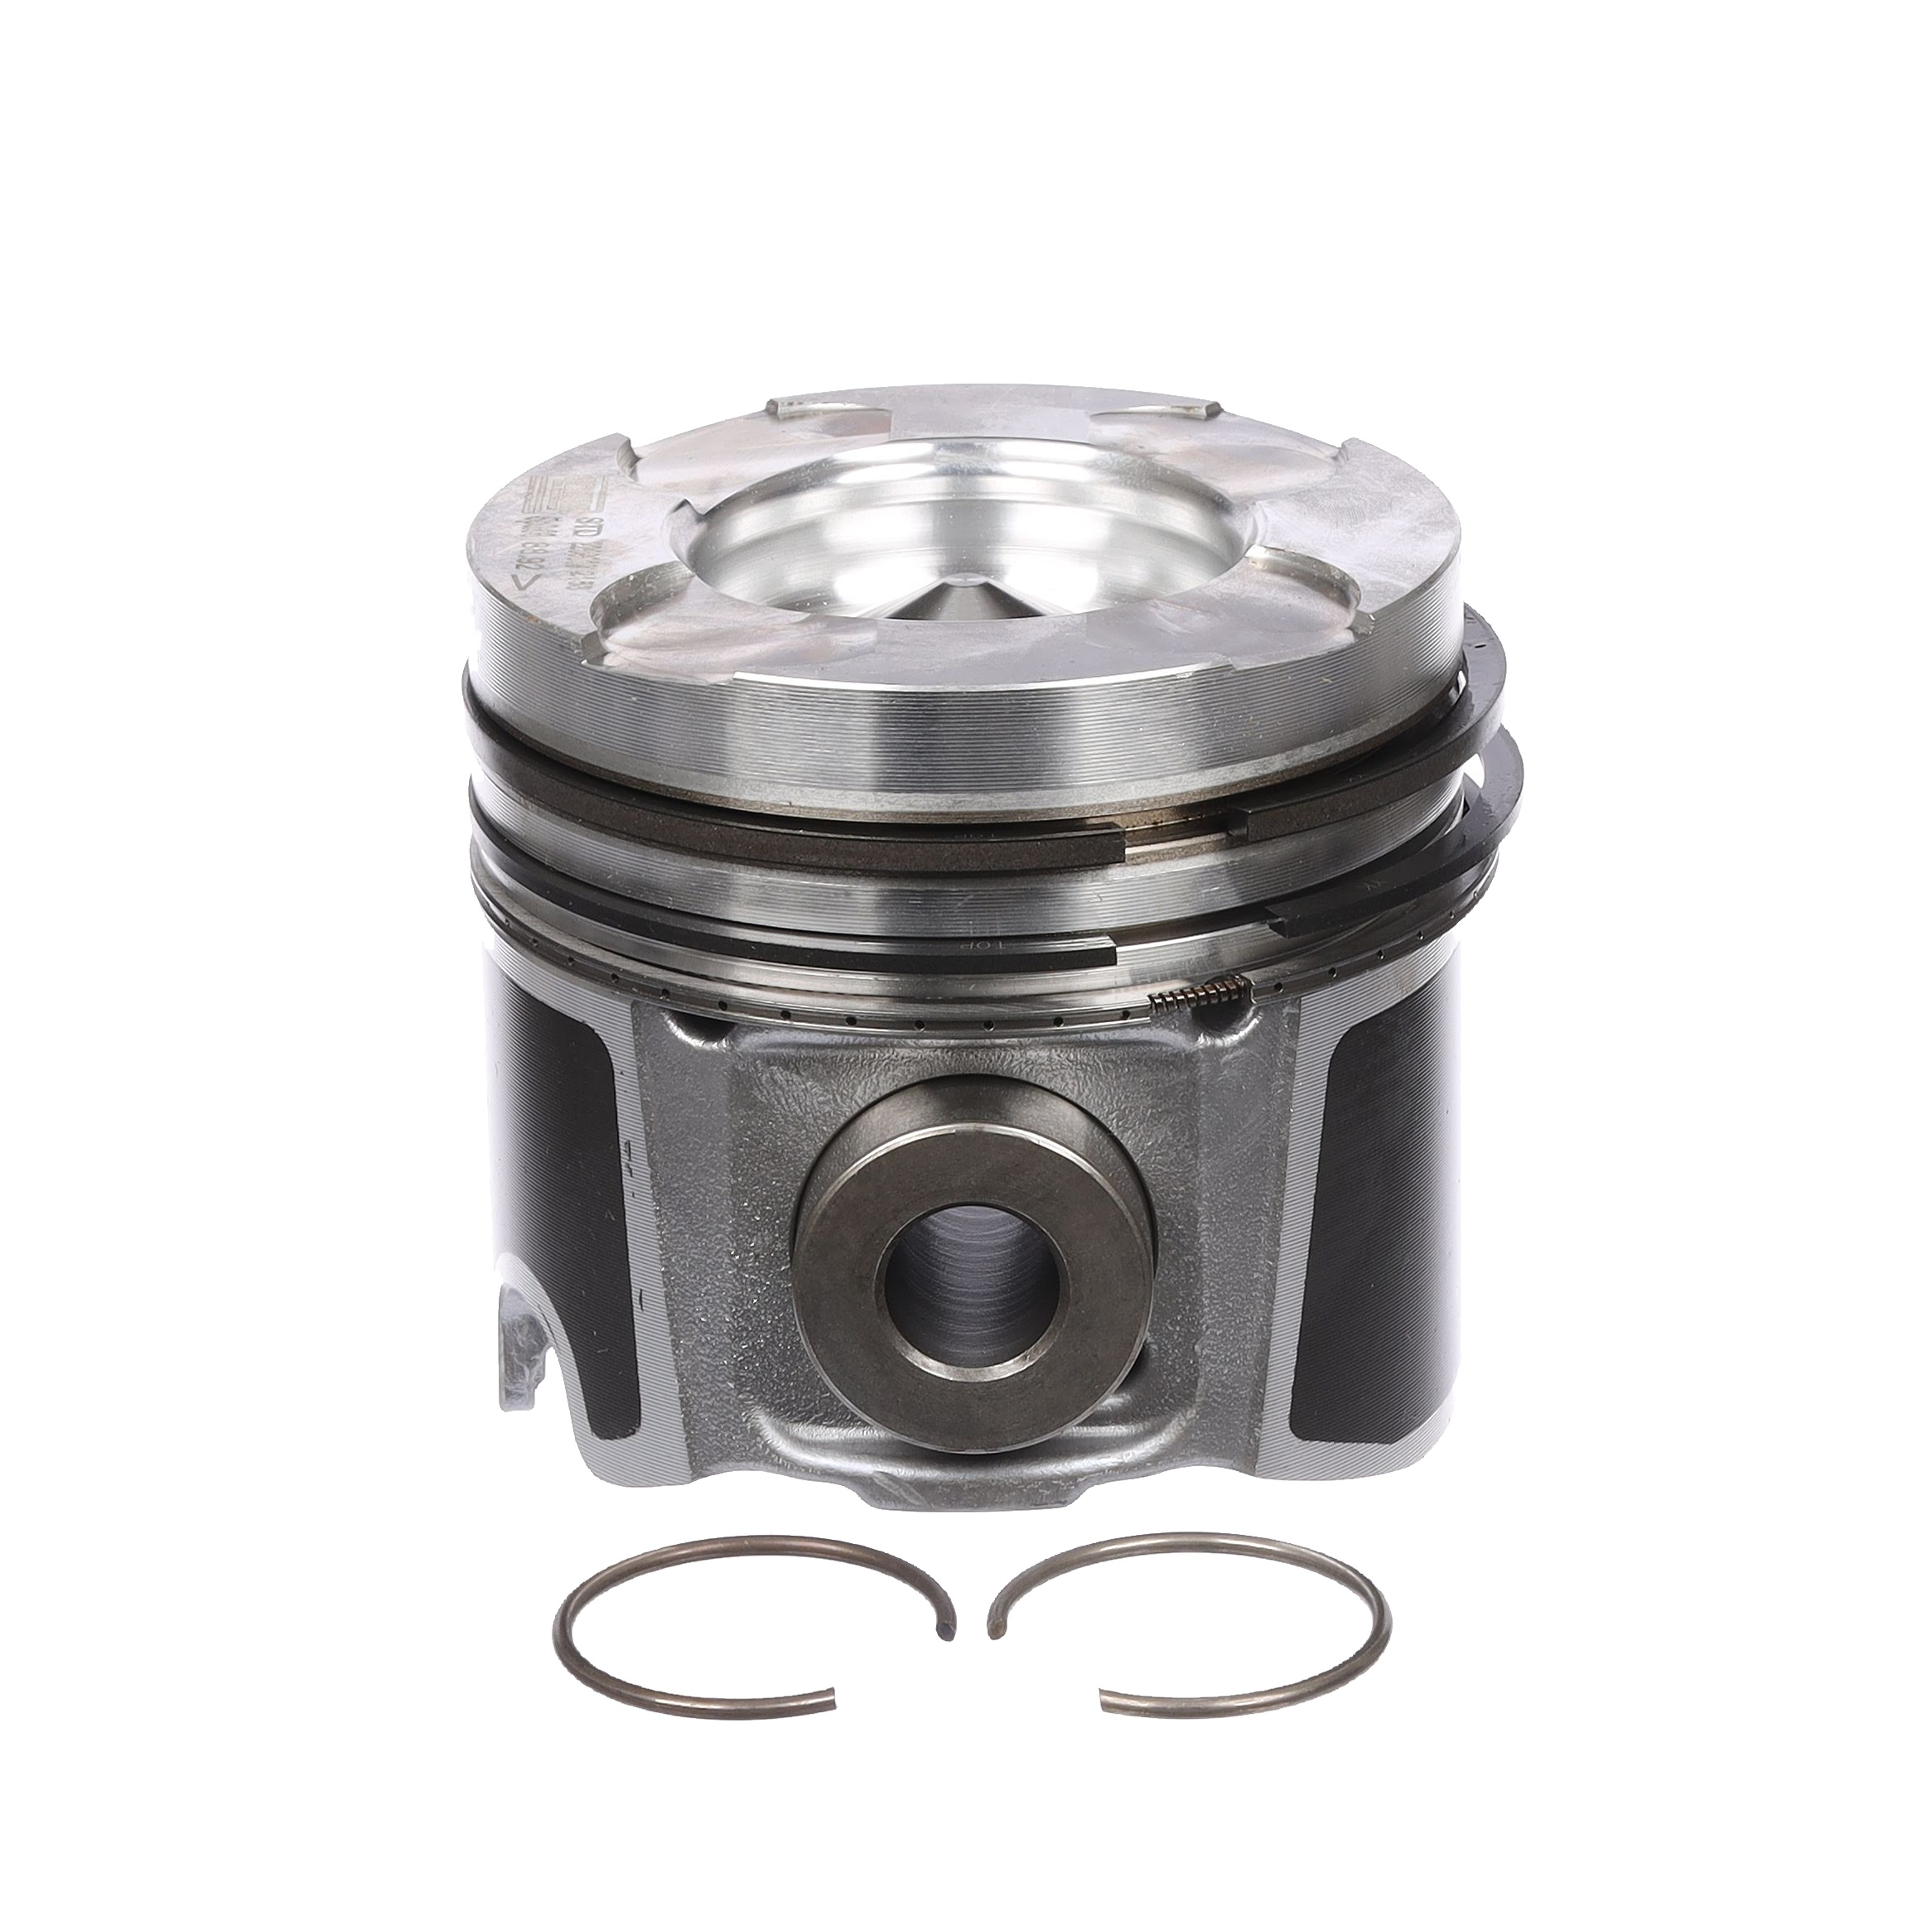 PM005100 ET ENGINETEAM Engine piston NISSAN 89 mm, with piston rings, with piston ring carrier, for keystone connecting rod